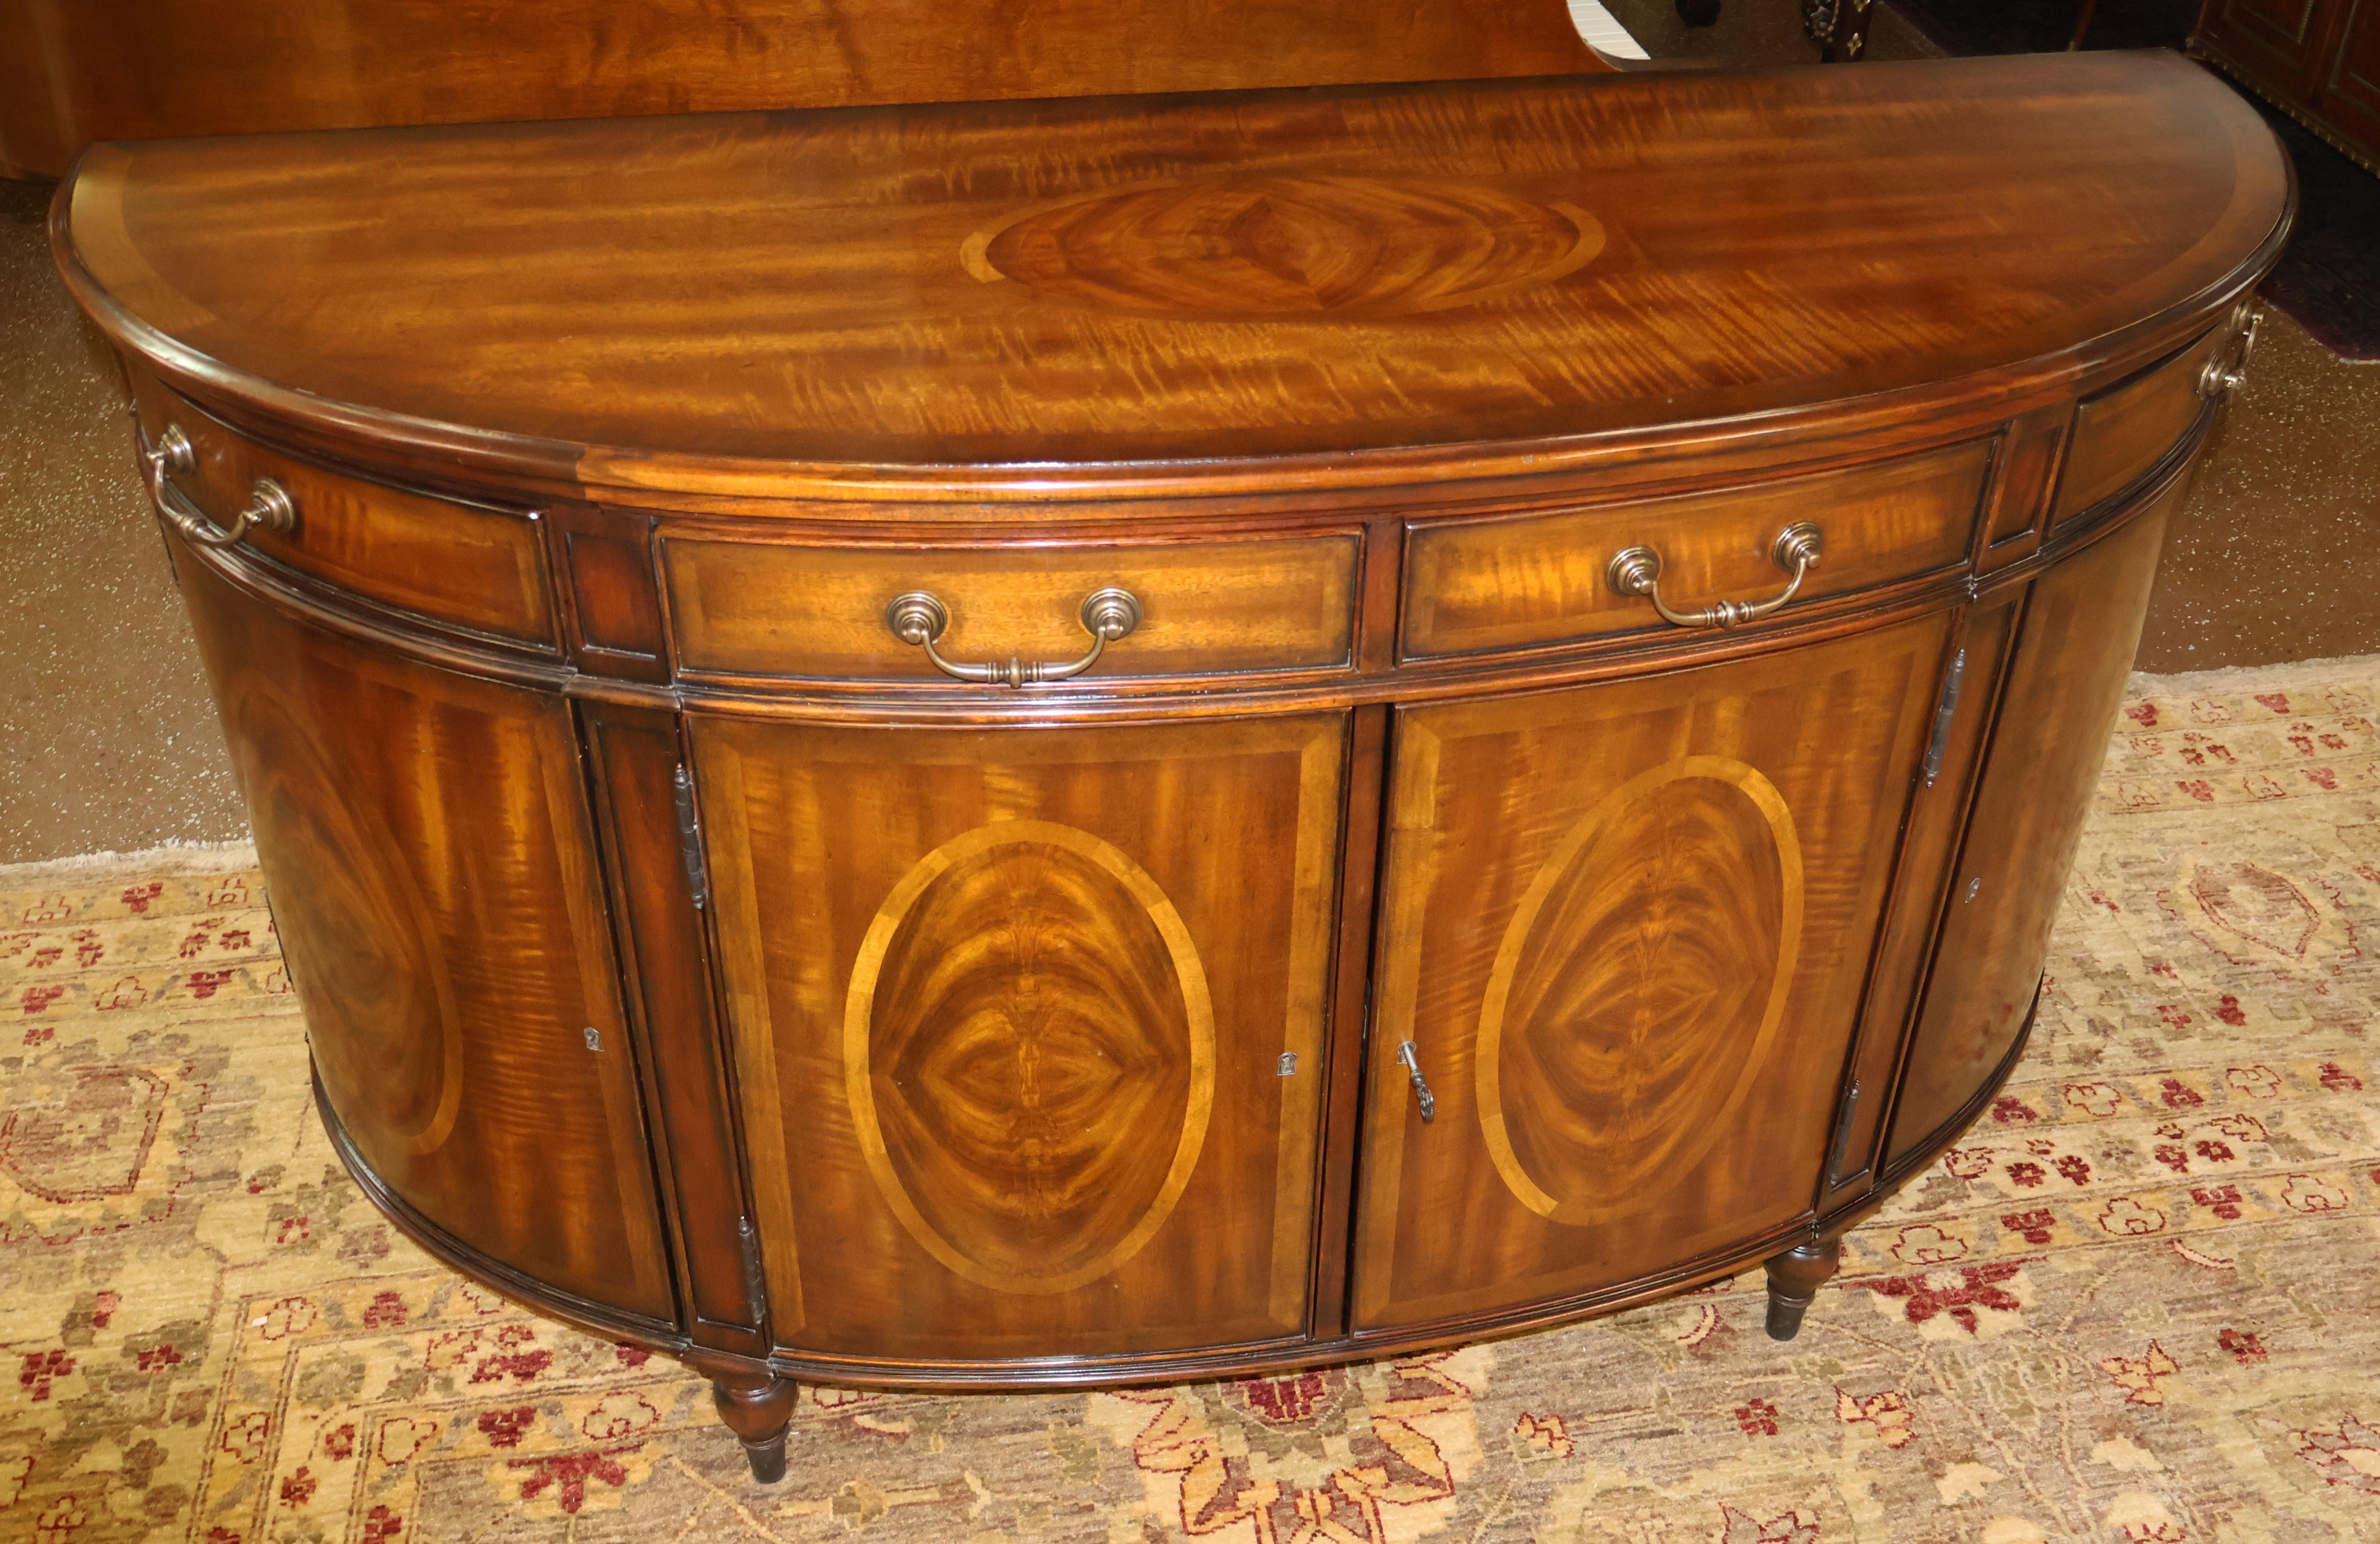 Contemporary Theodore Alexander Flame Mahogany Demilune Regency Style Buffet Server Sideboard